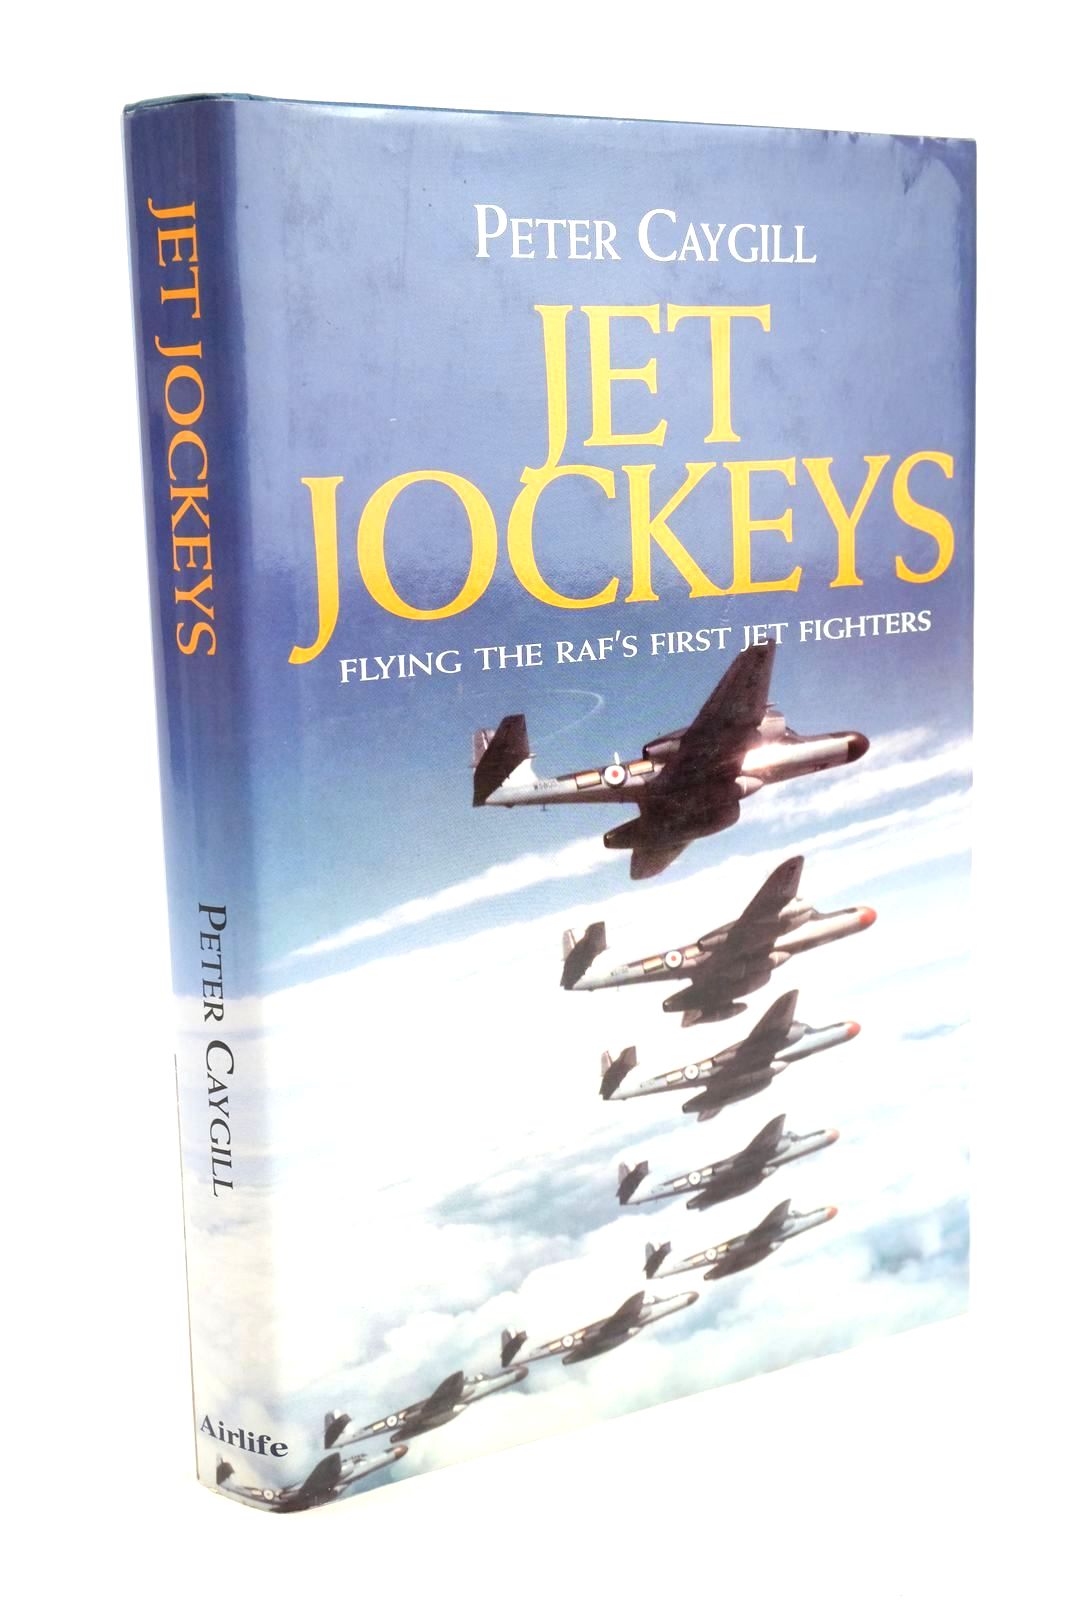 Photo of JET JOCKEYS: FLYING THE RAF'S FIRST JET FIGHTERS written by Caygill, Peter published by Airlife (STOCK CODE: 1327924)  for sale by Stella & Rose's Books